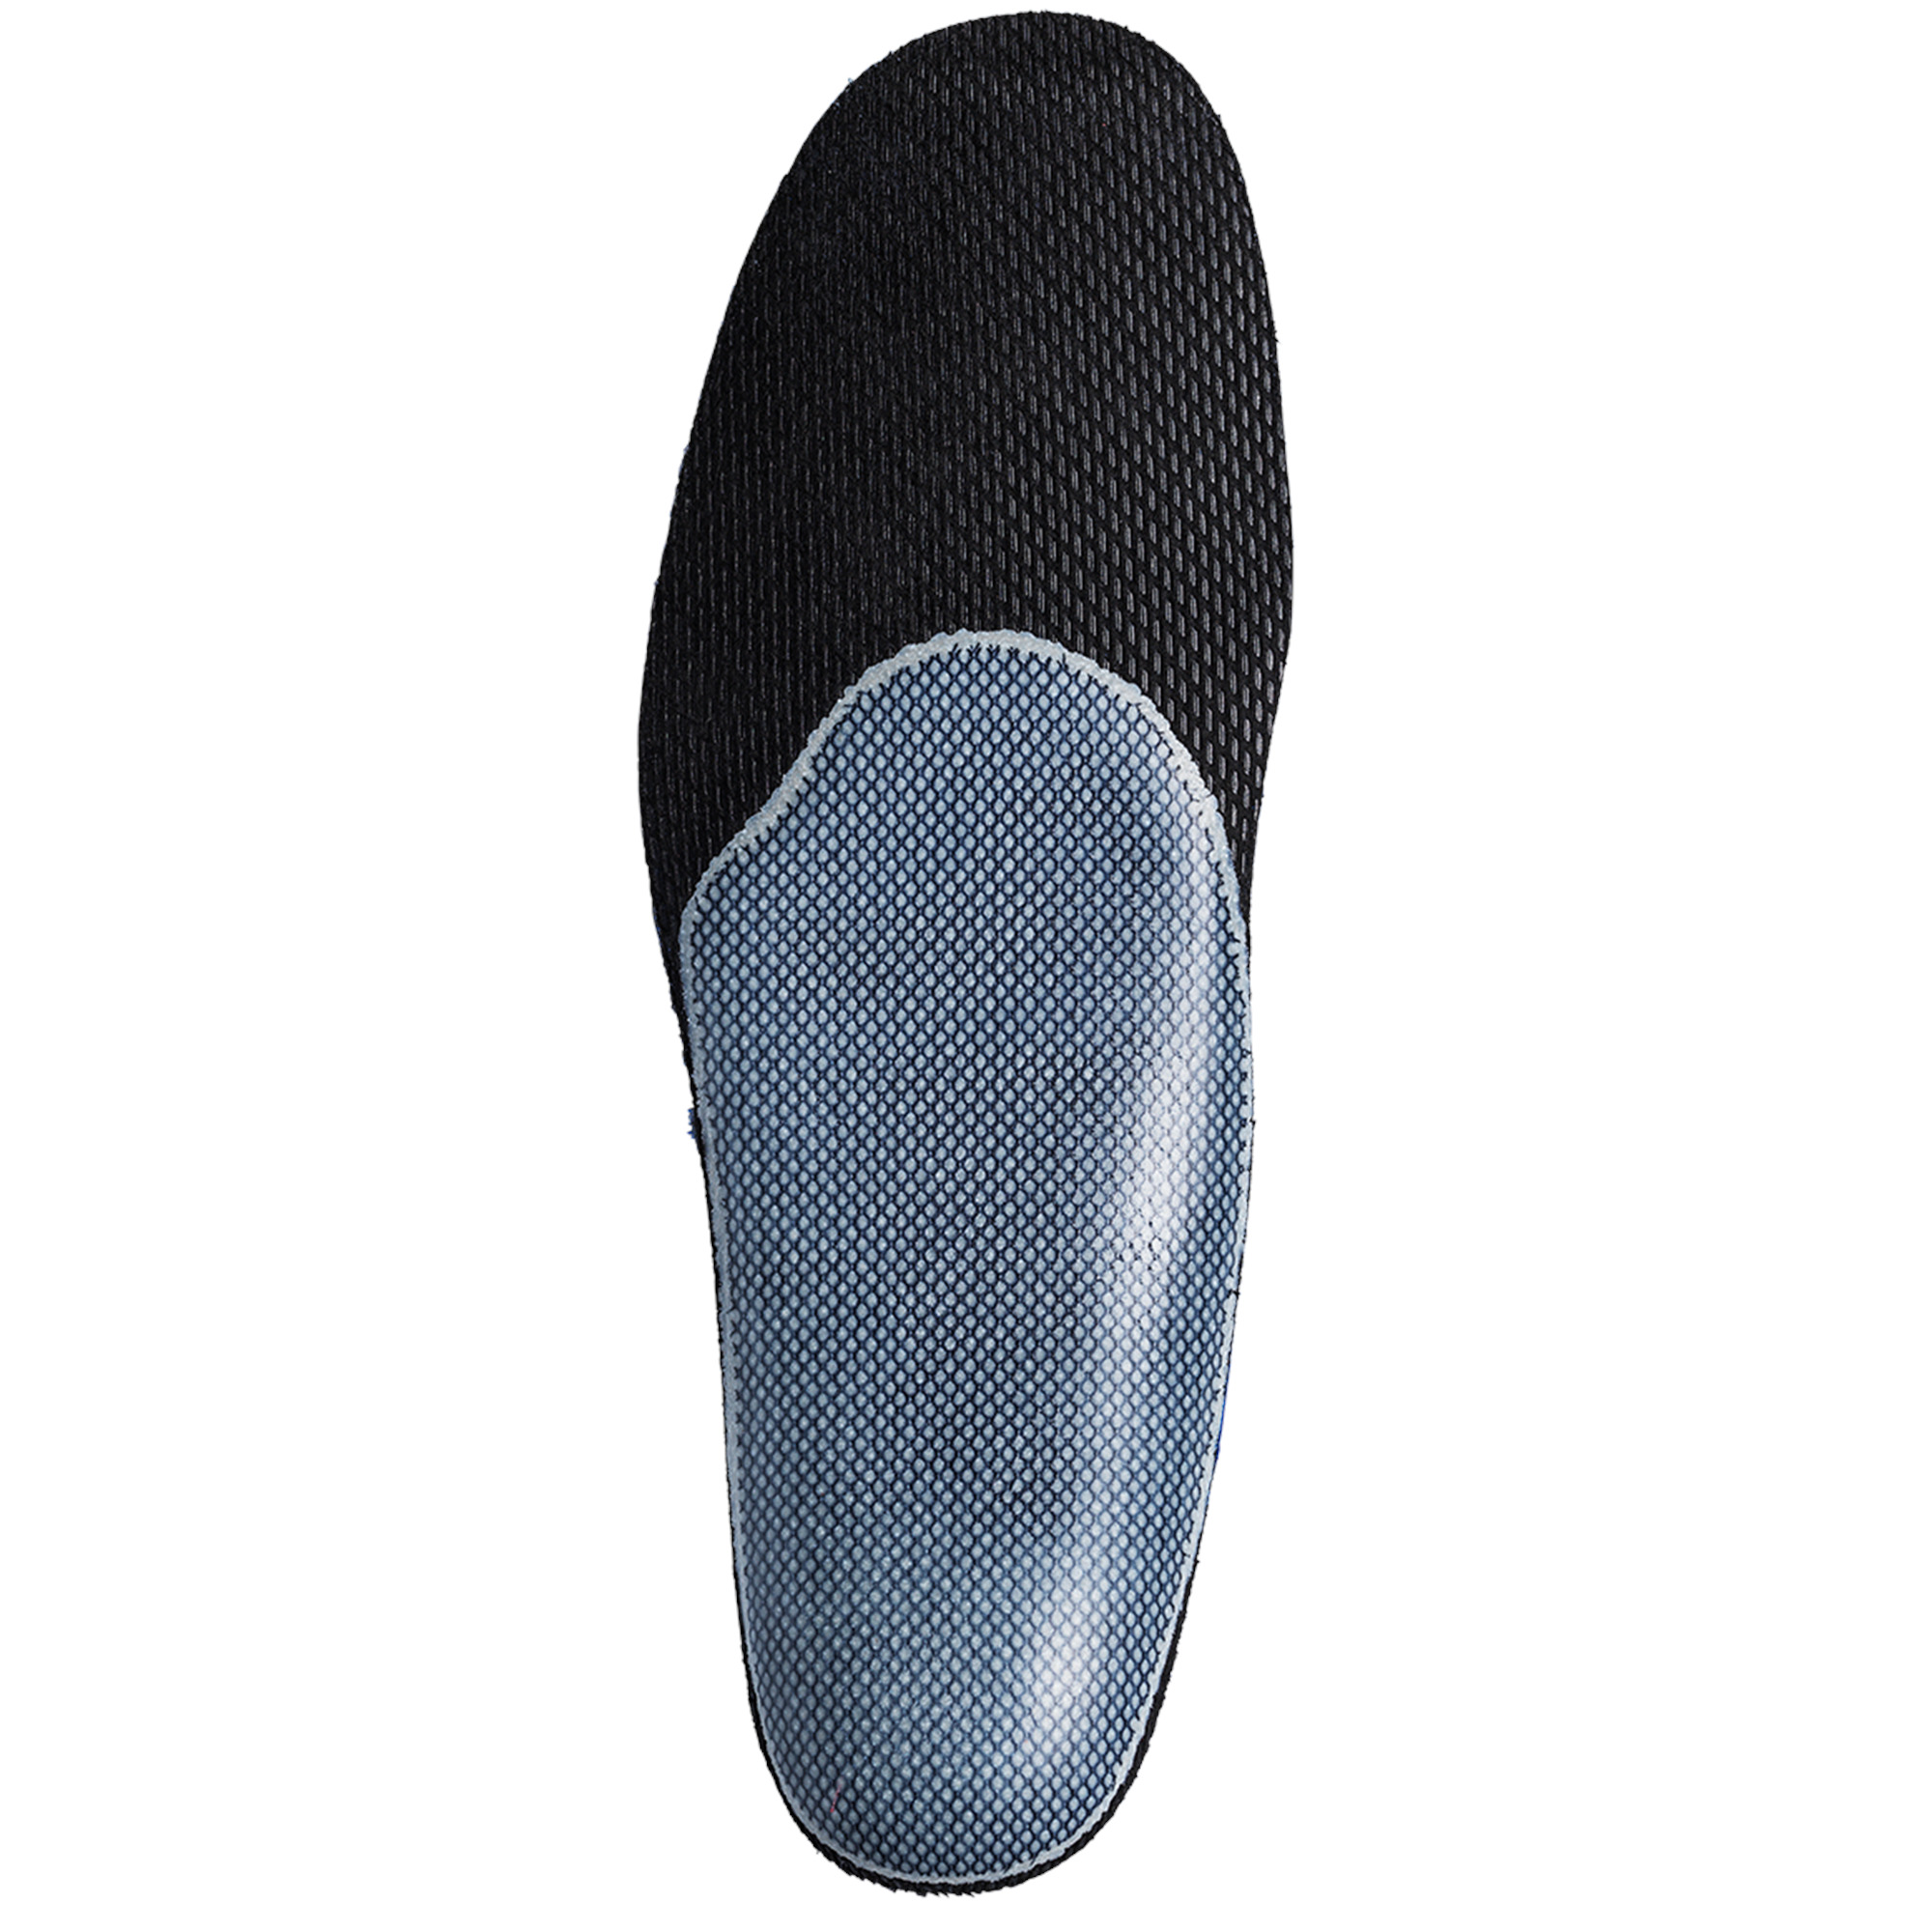 SPEED insoles